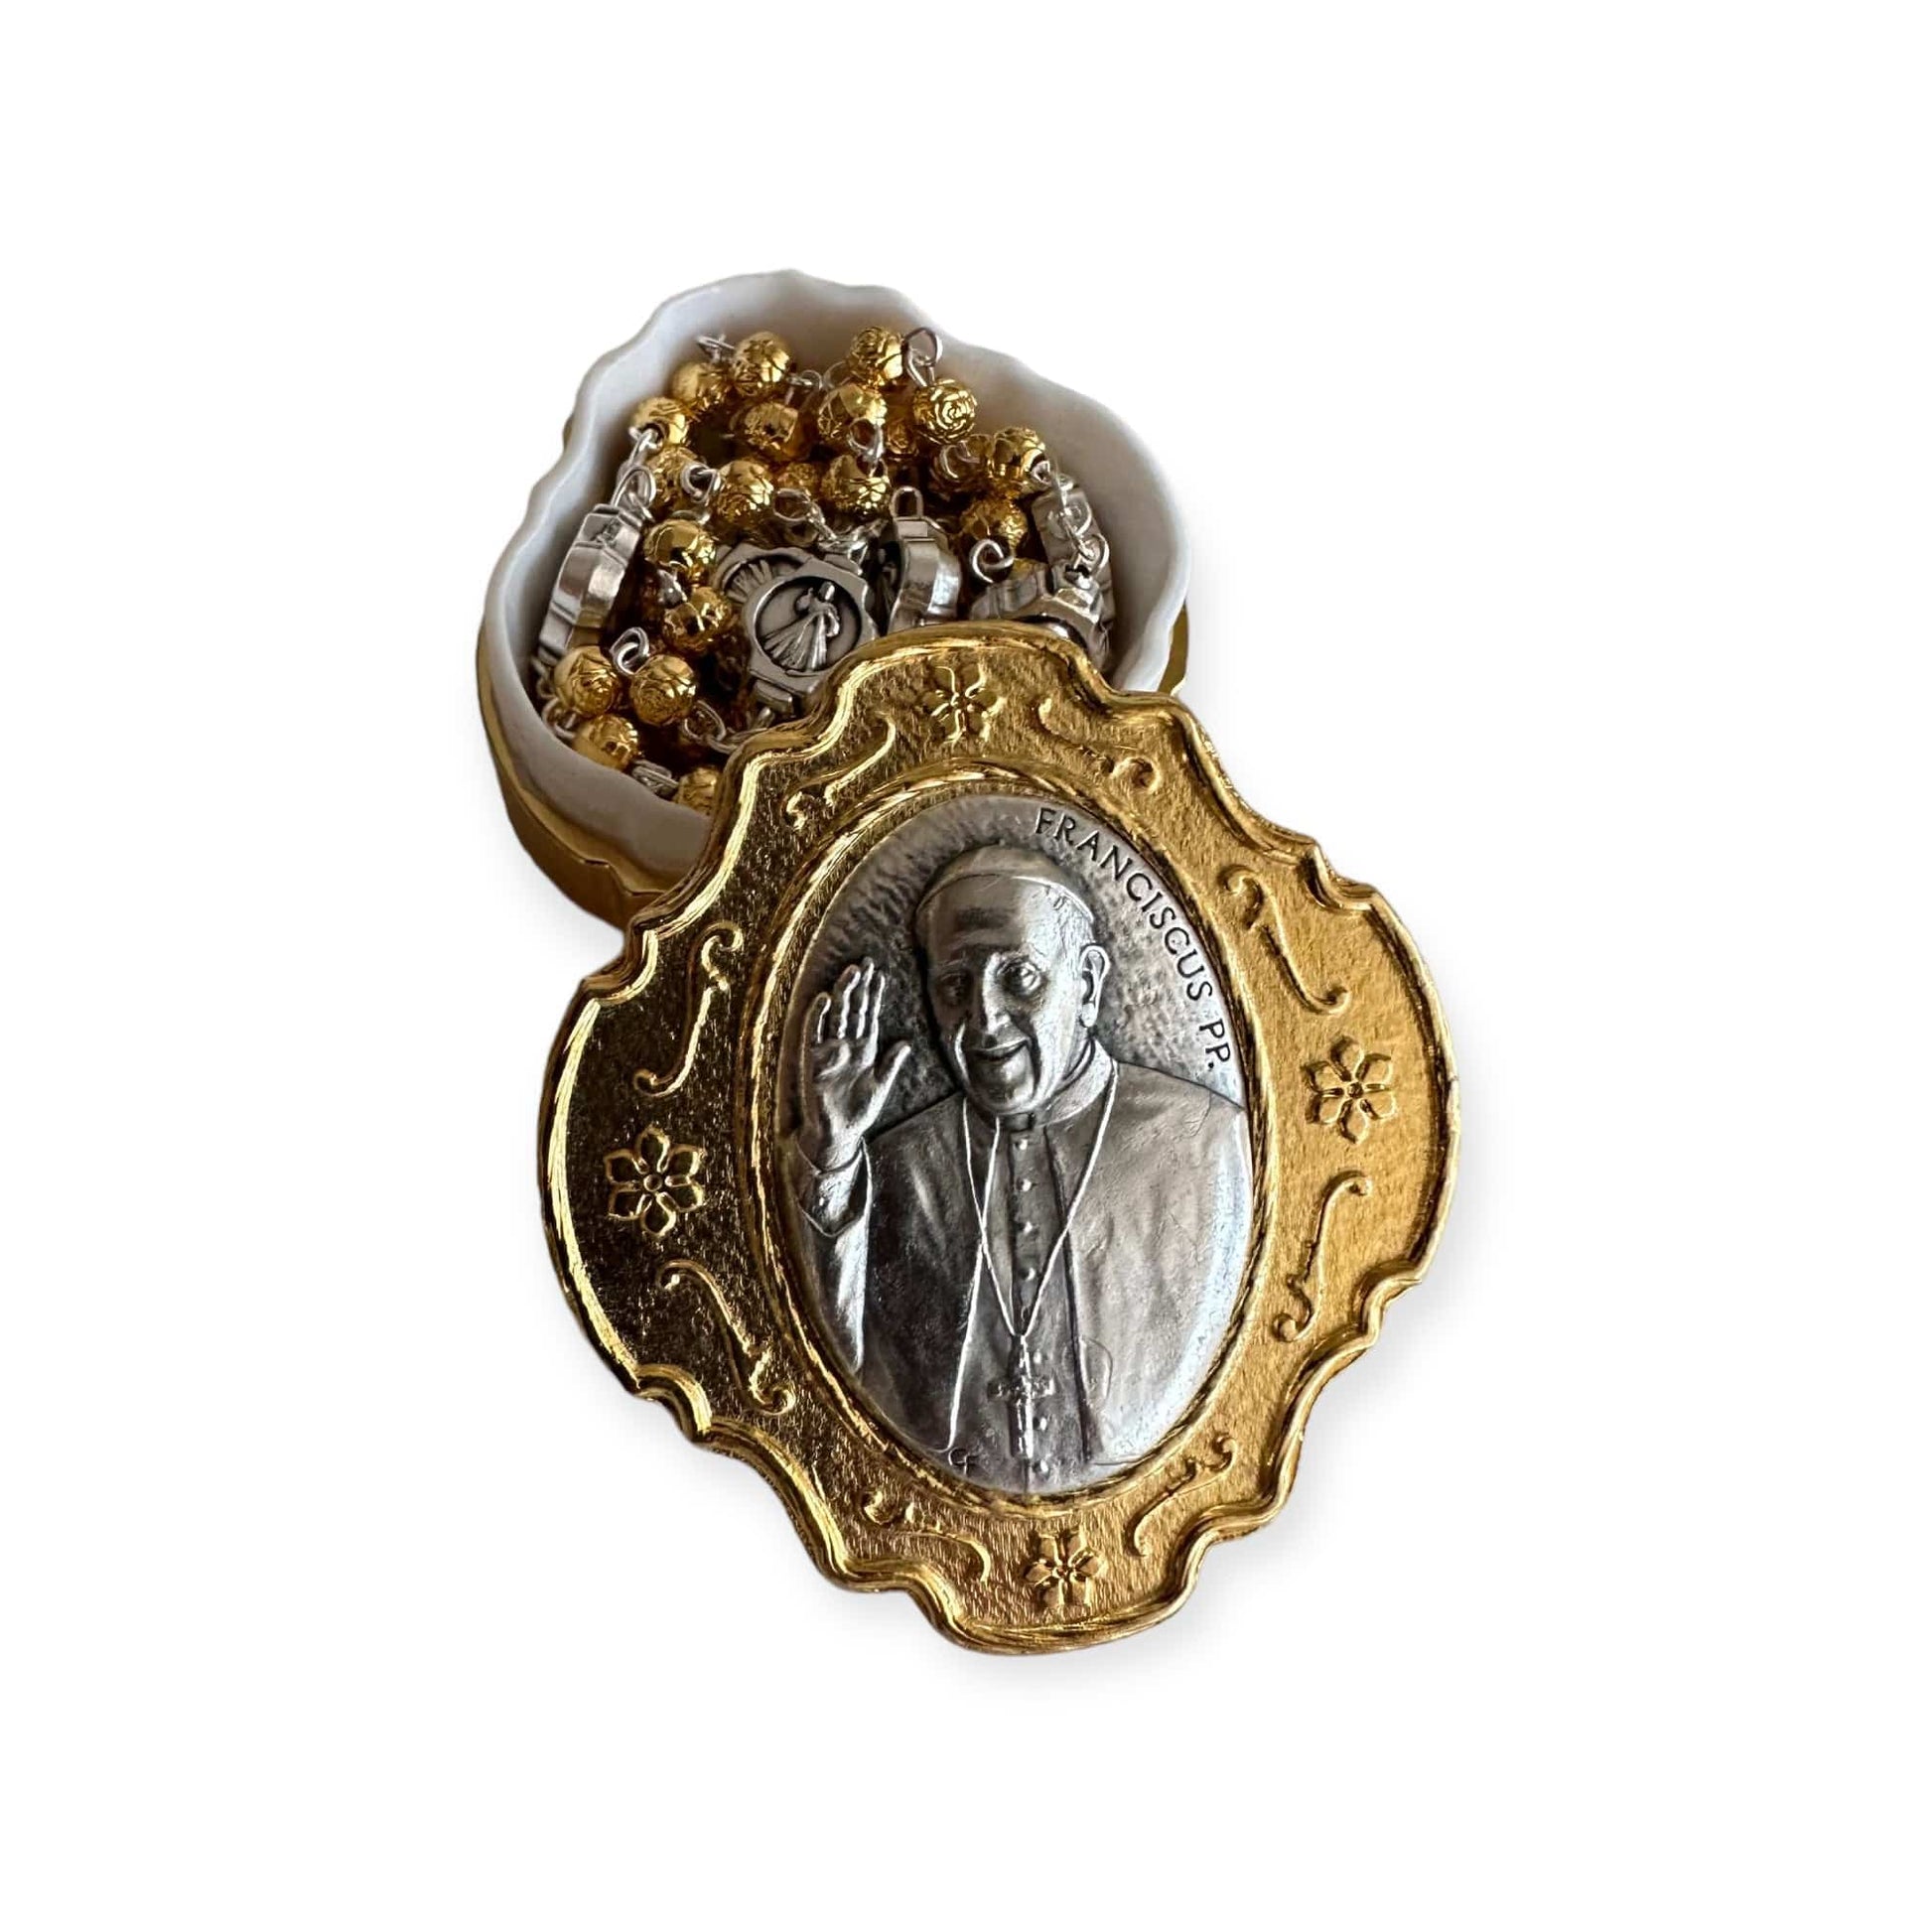 Catholically Rosaries Dedicated To Pope Francis - Tiny Golden Rosary w/ Case - Blessed By Pope